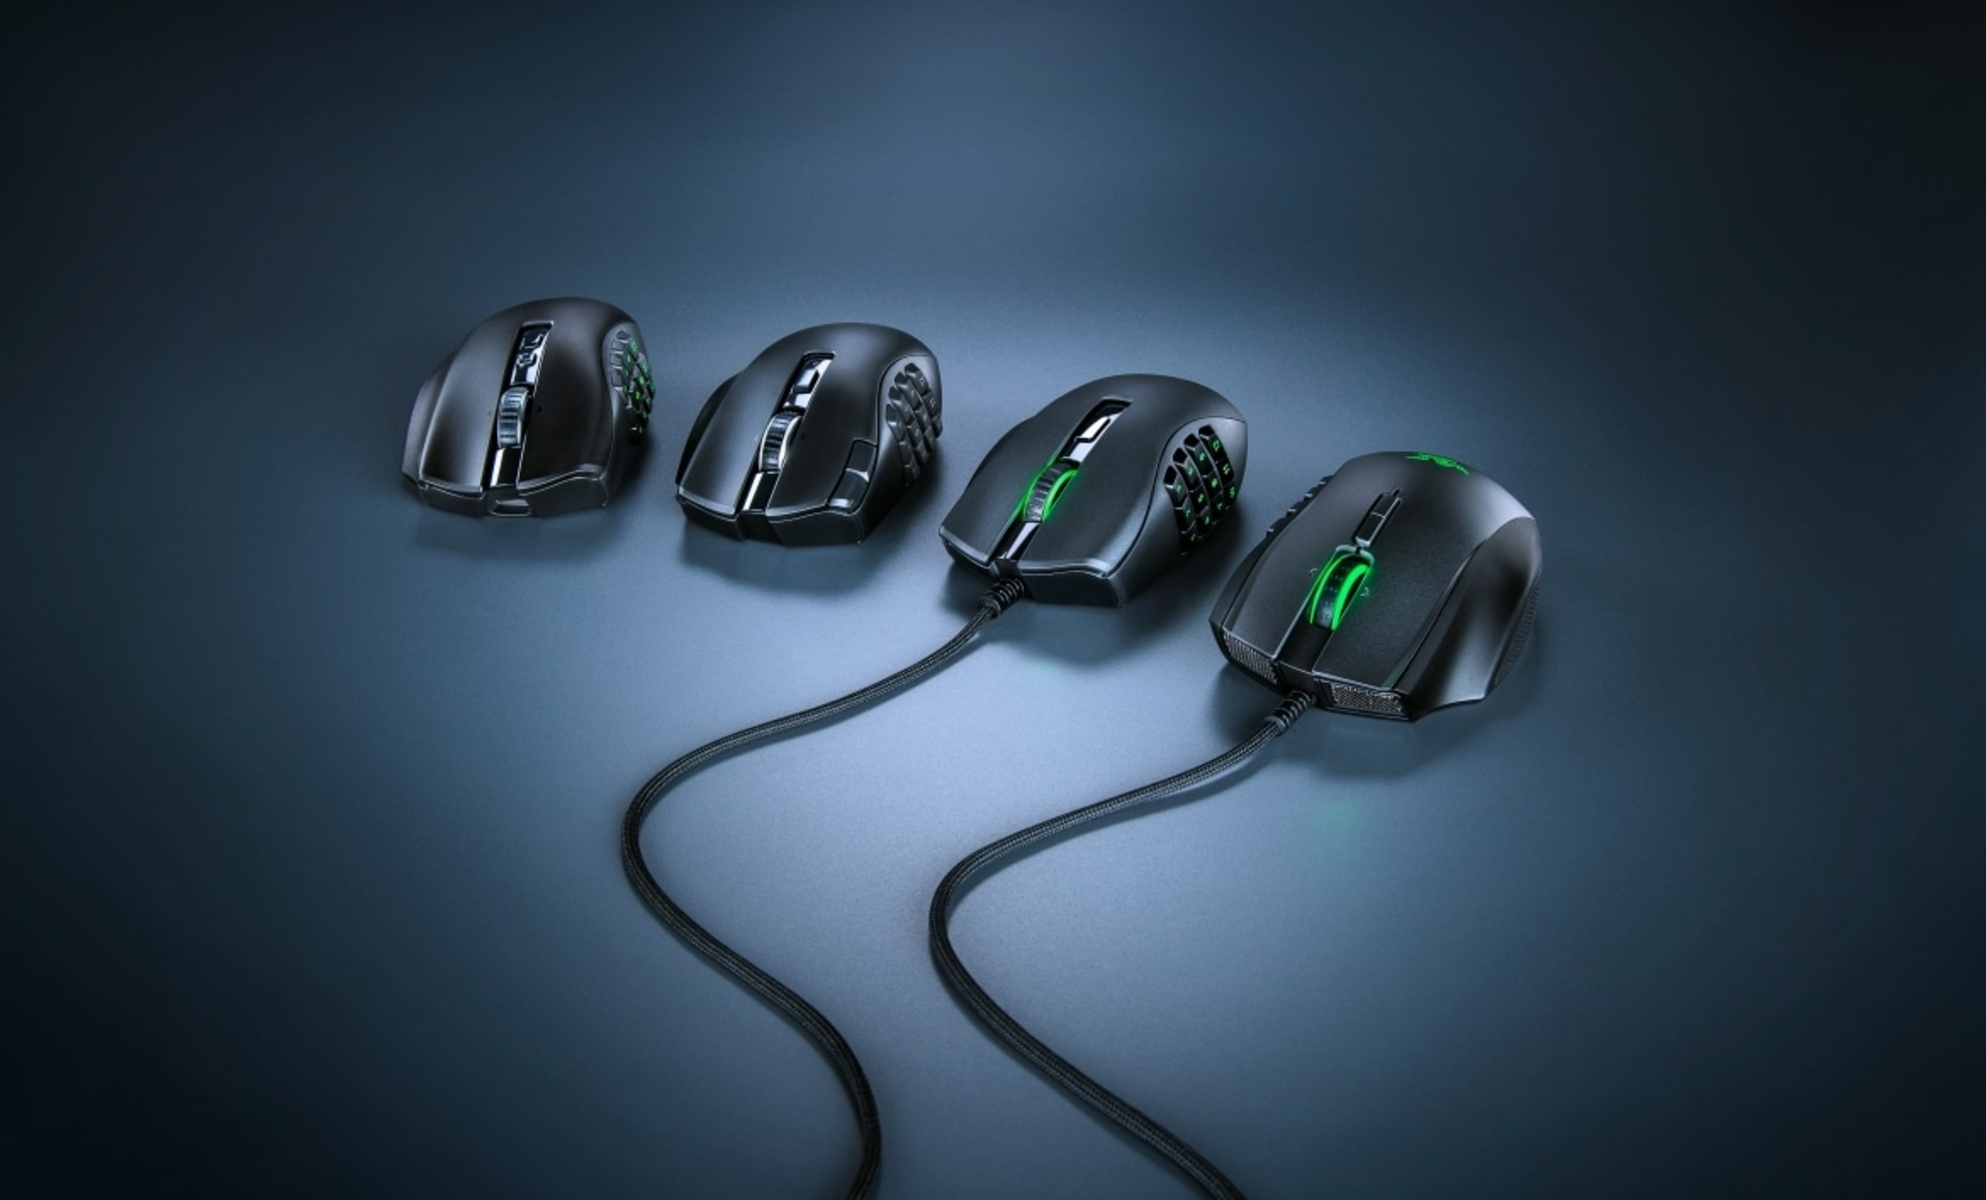 razer-naga-epic-chroma-mmo-gaming-mouse-how-to-set-back-and-forward-buttons